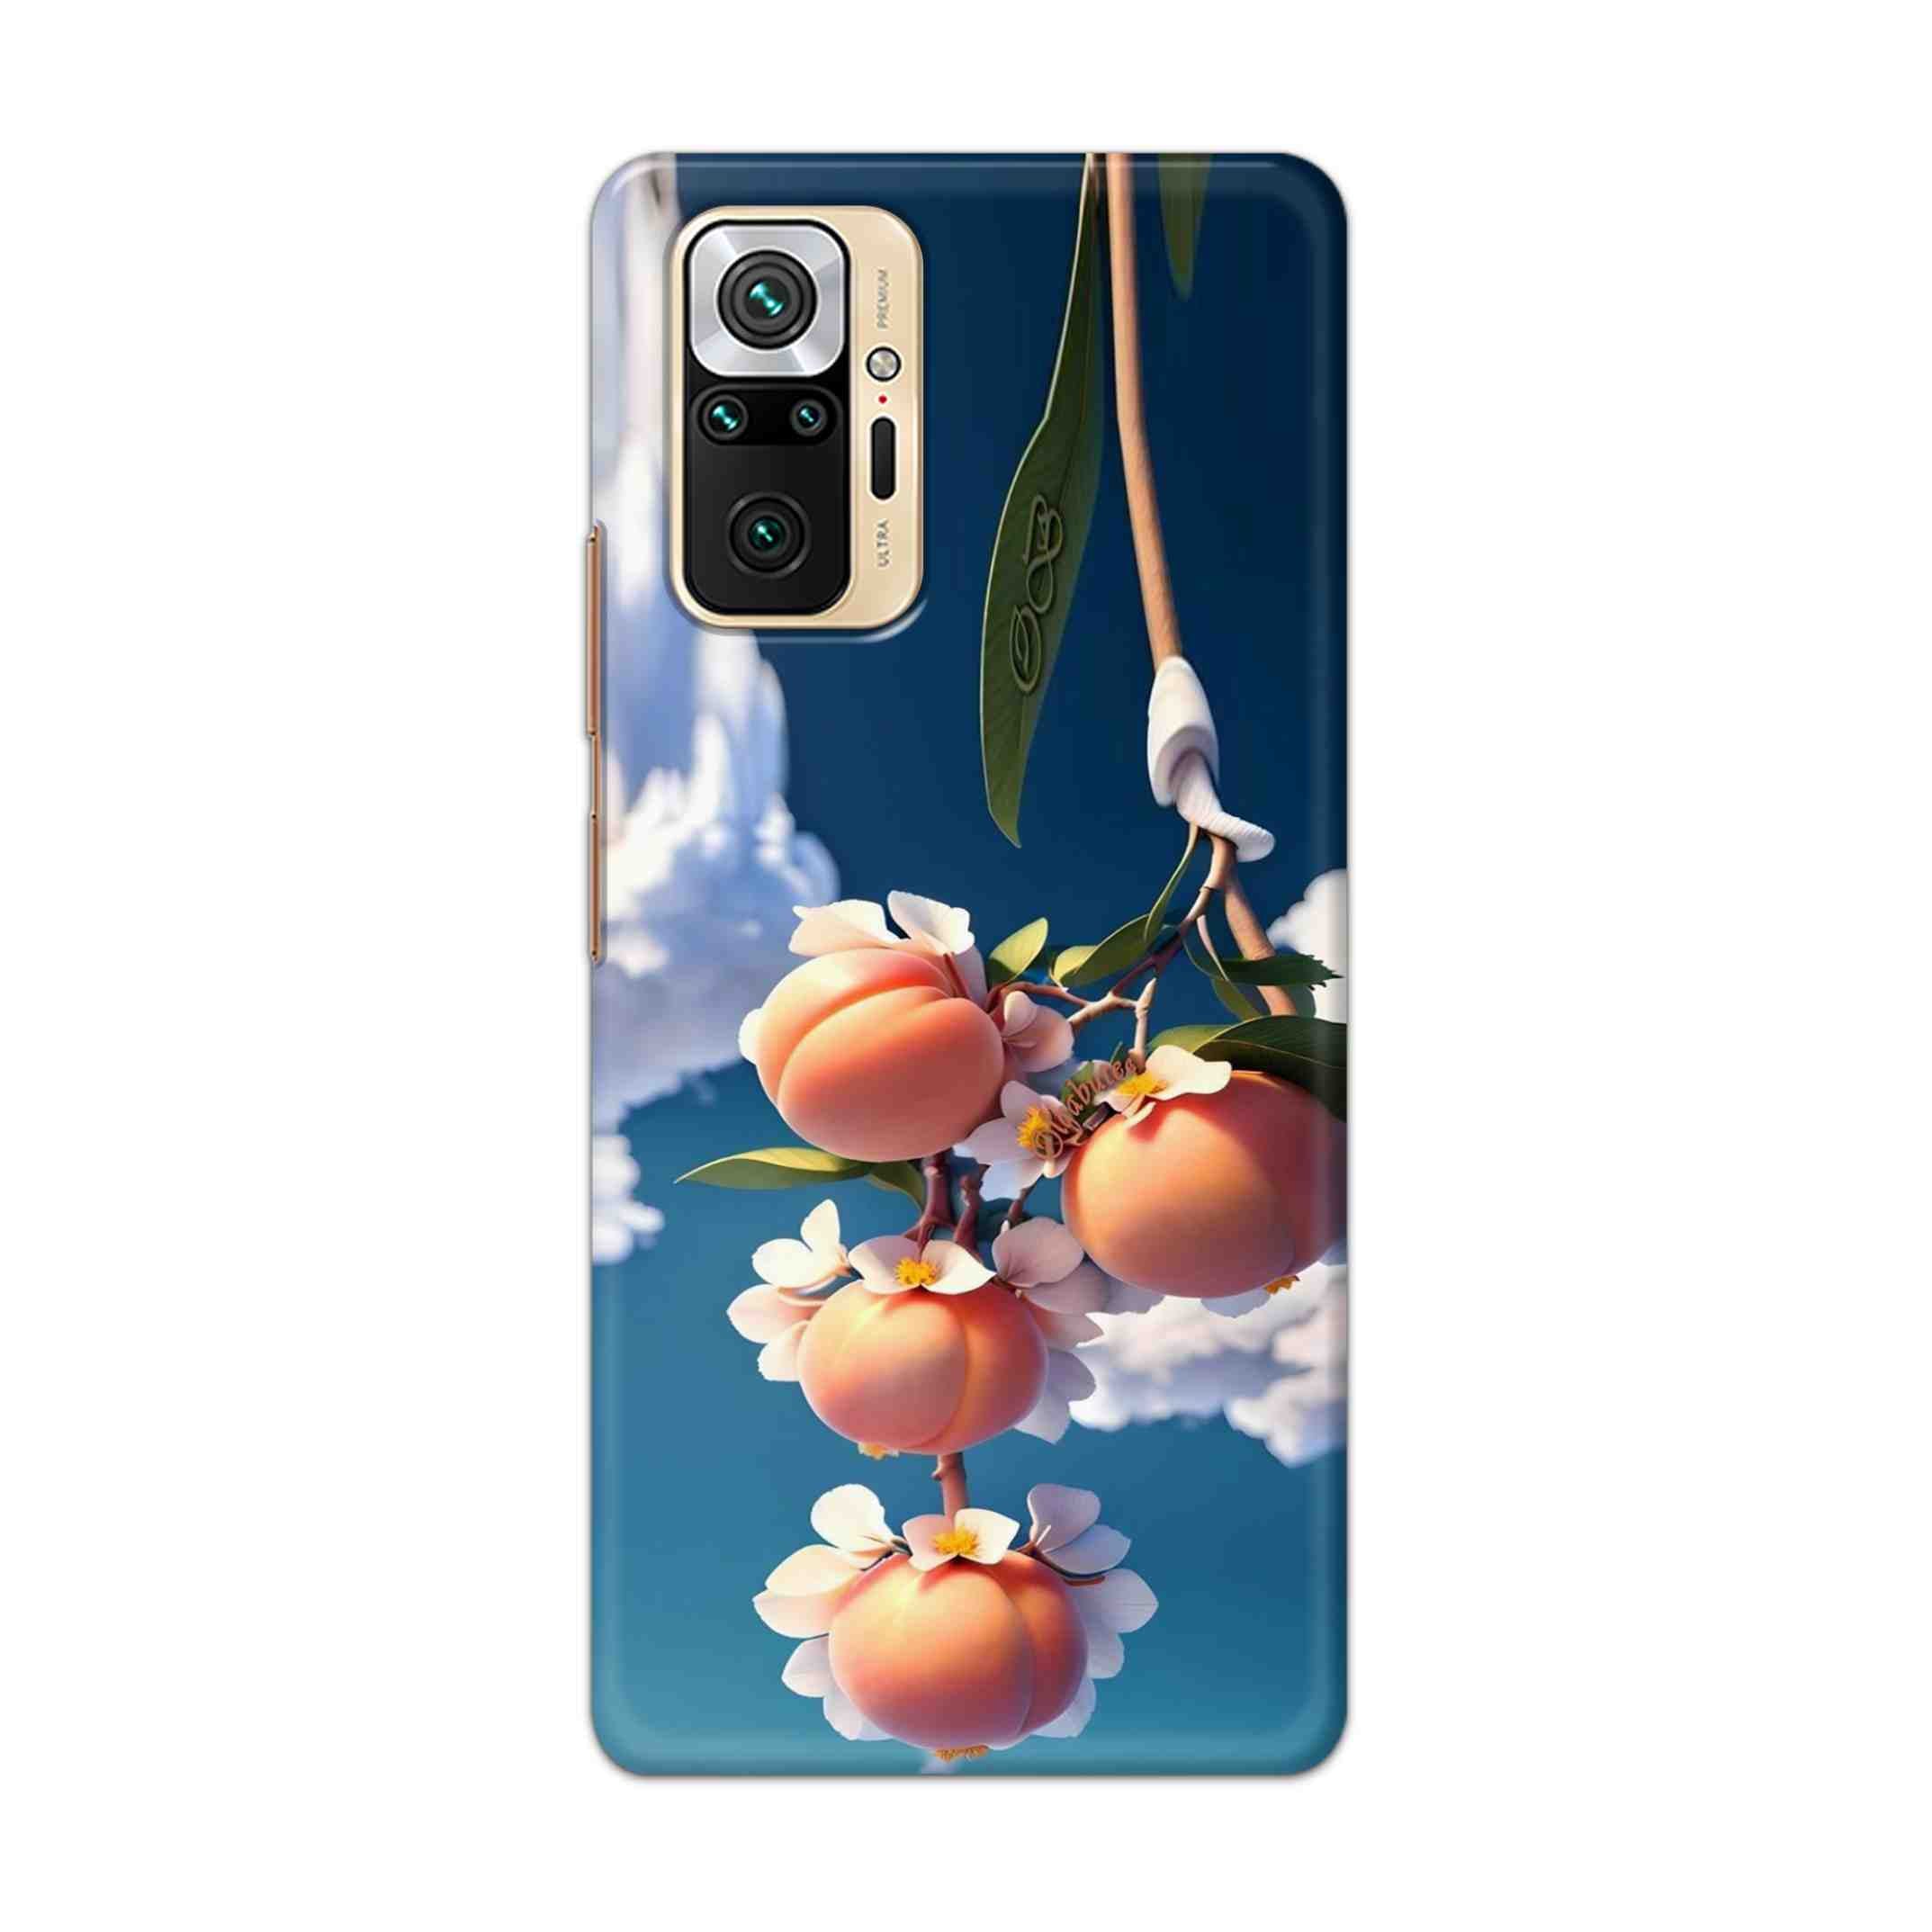 Buy Fruit Hard Back Mobile Phone Case Cover For Redmi Note 10 Pro Online